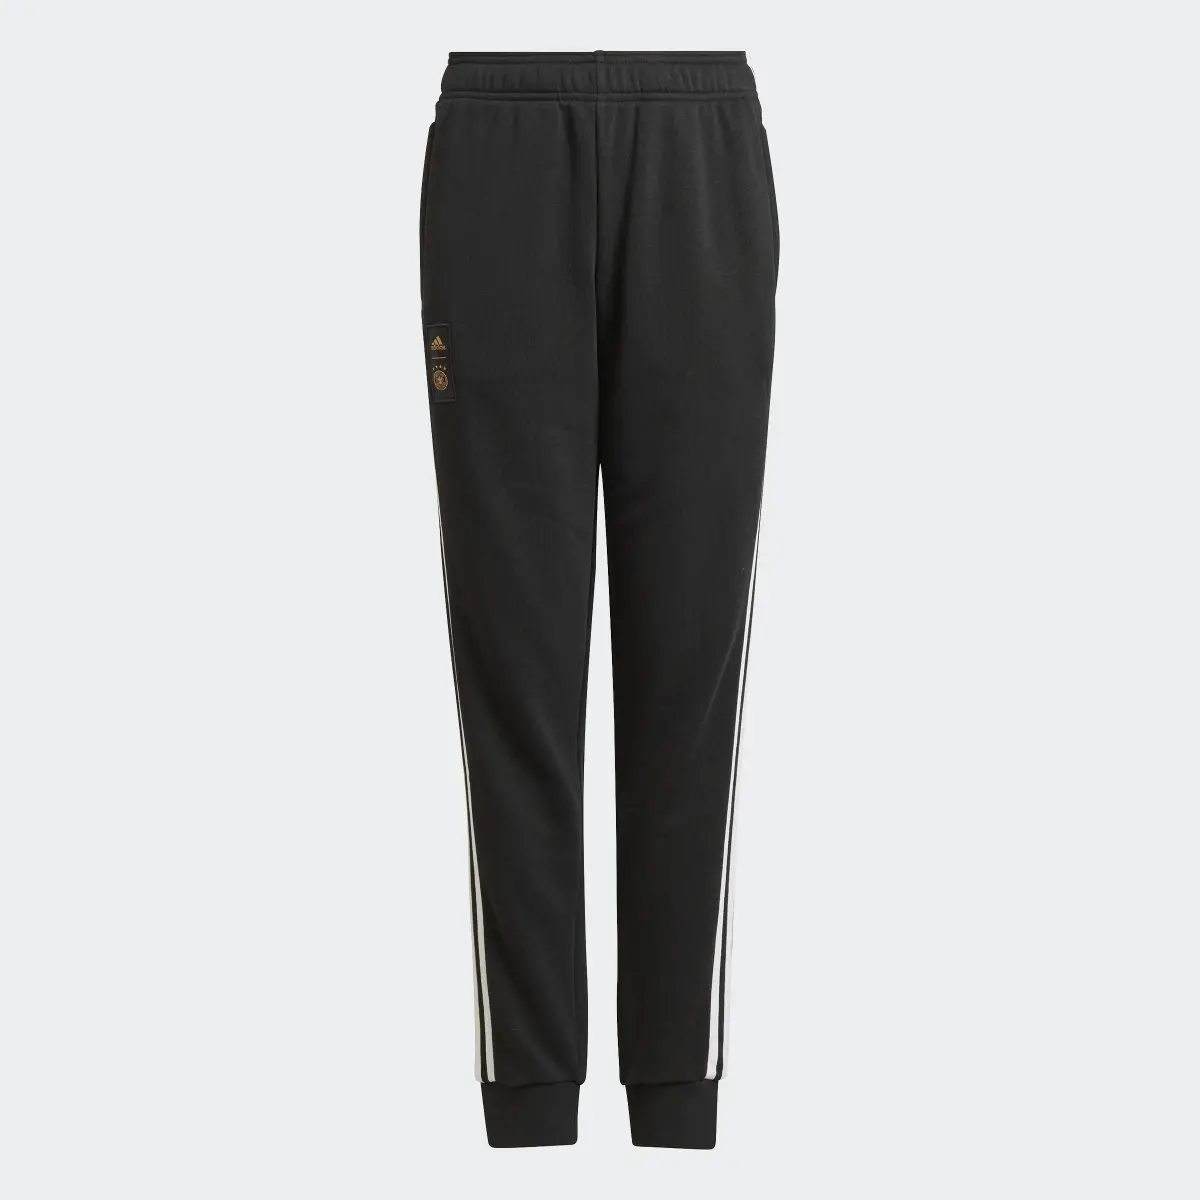 Adidas Germany Tracksuit Bottoms. 1